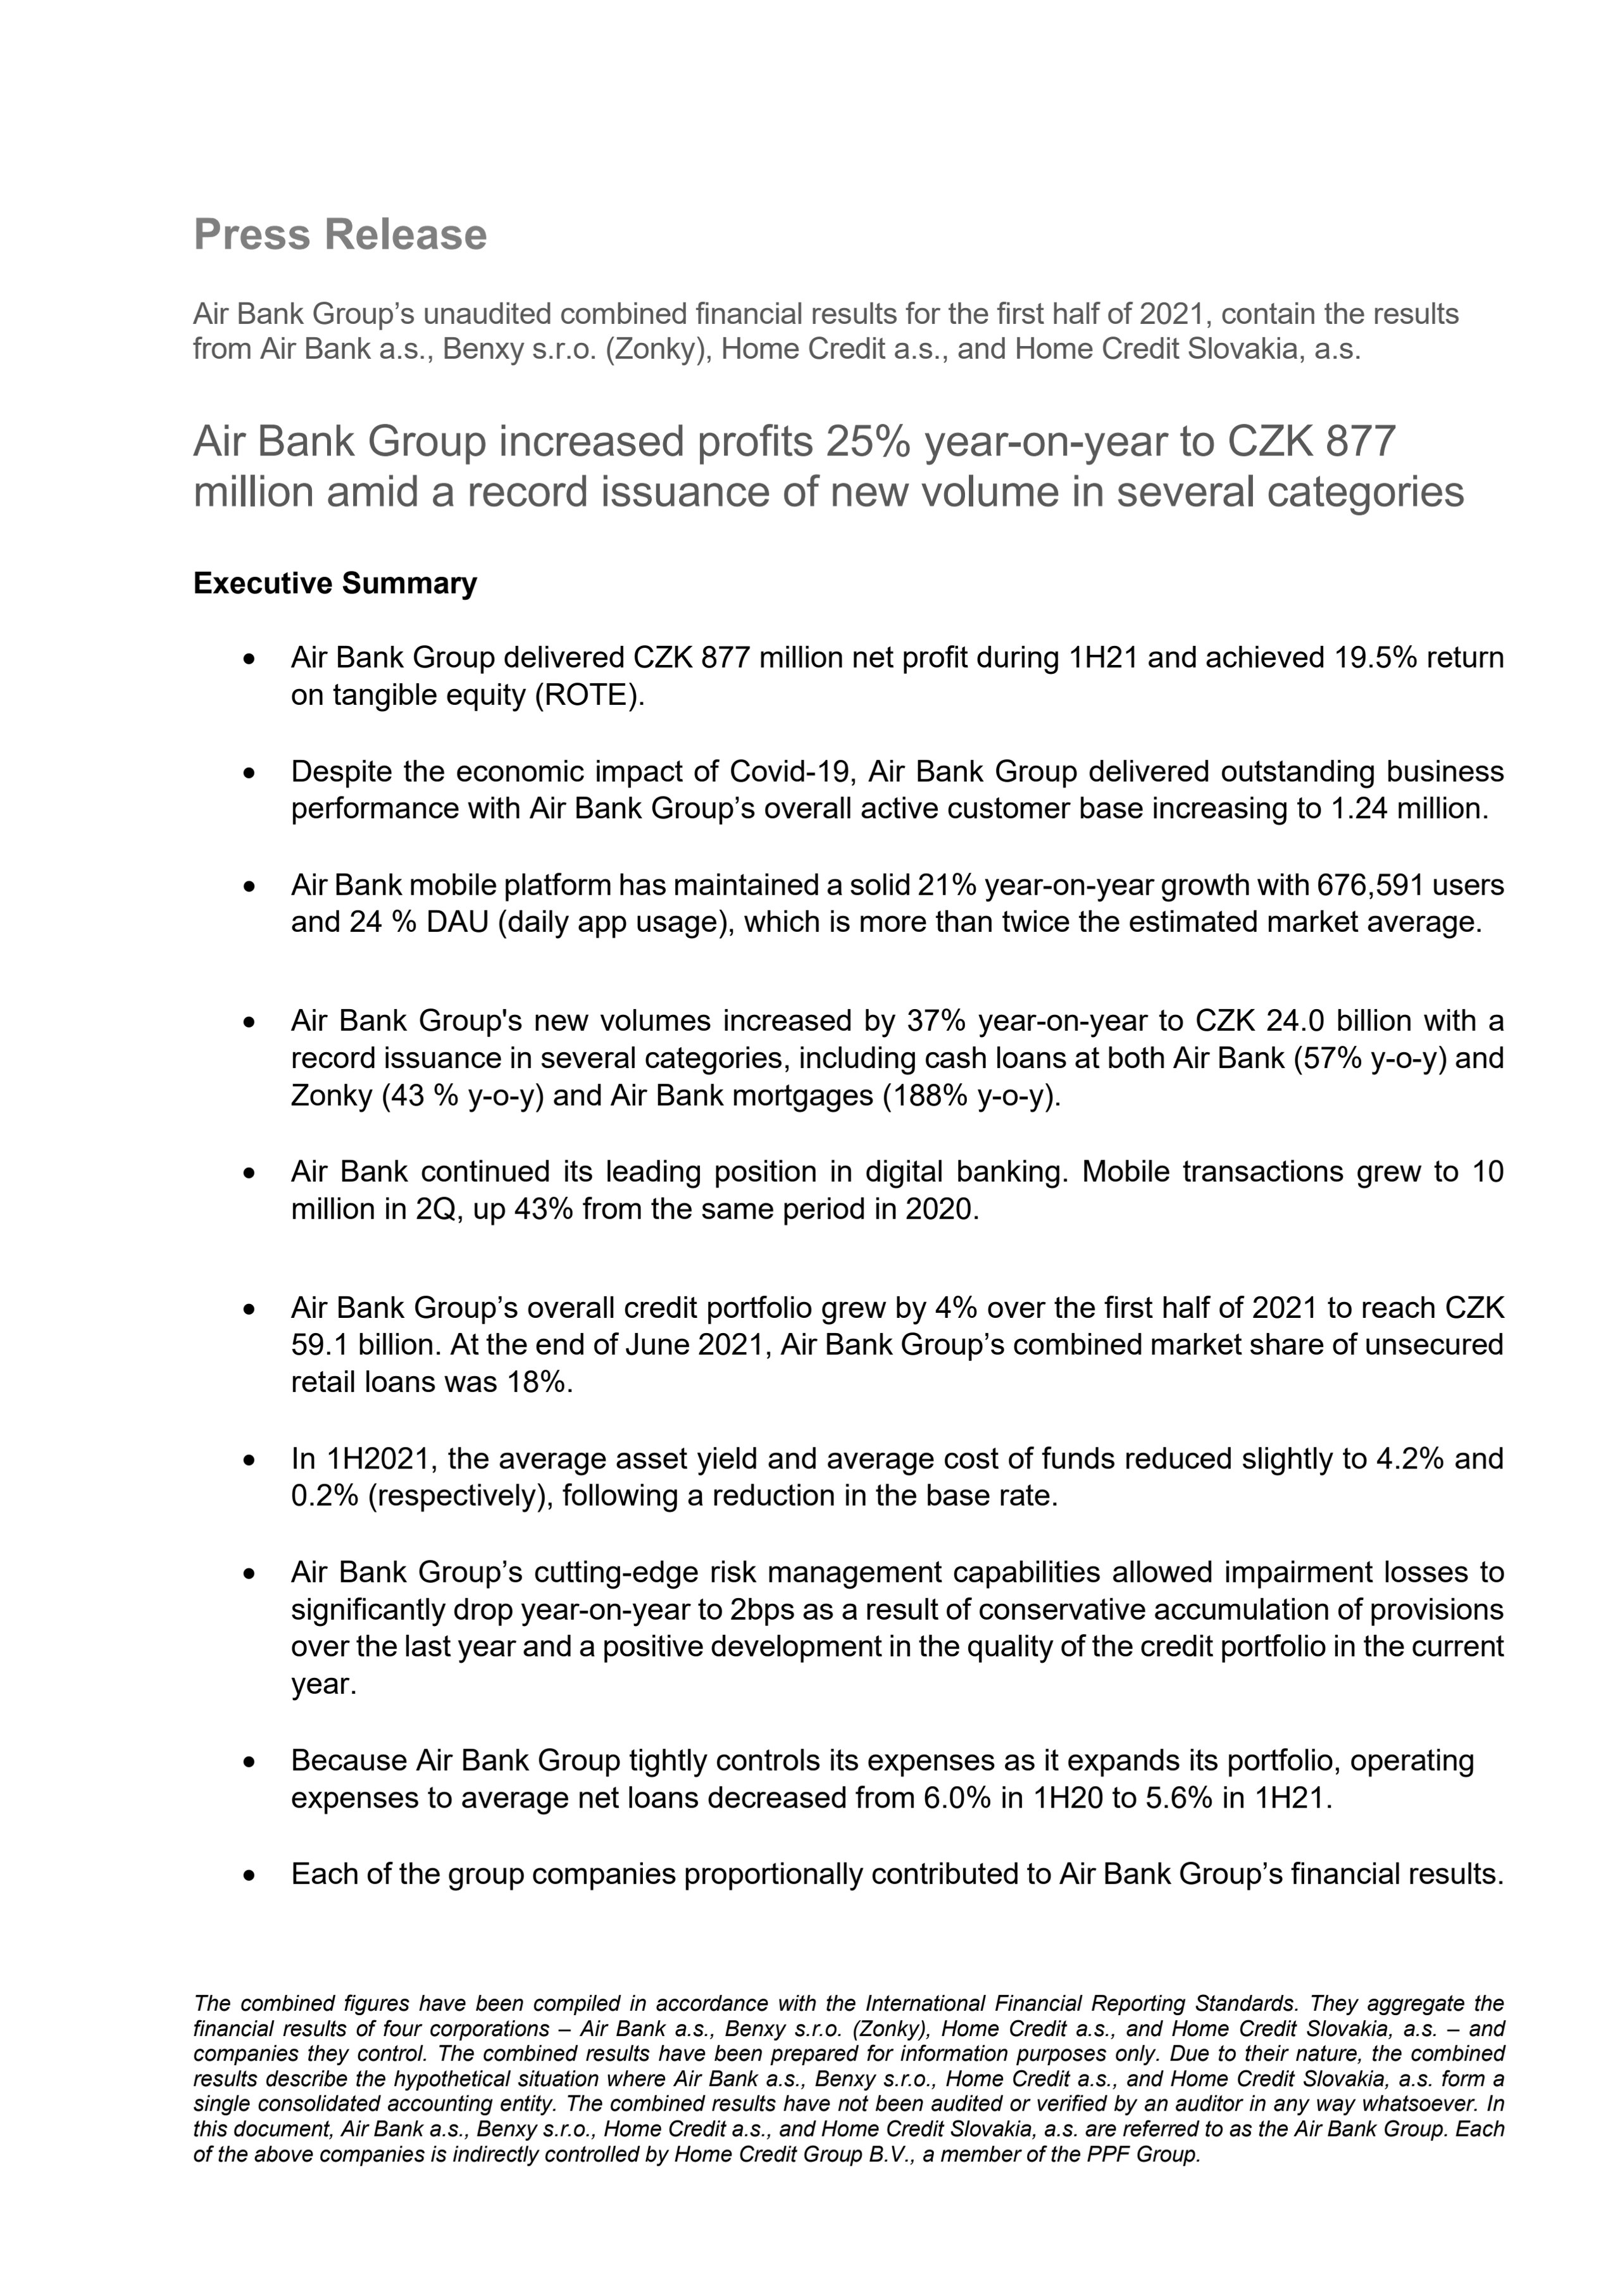 Air Bank Group increased profits 25% year-on-year to CZK 877 million amid a record issuance of new volume in several categories 